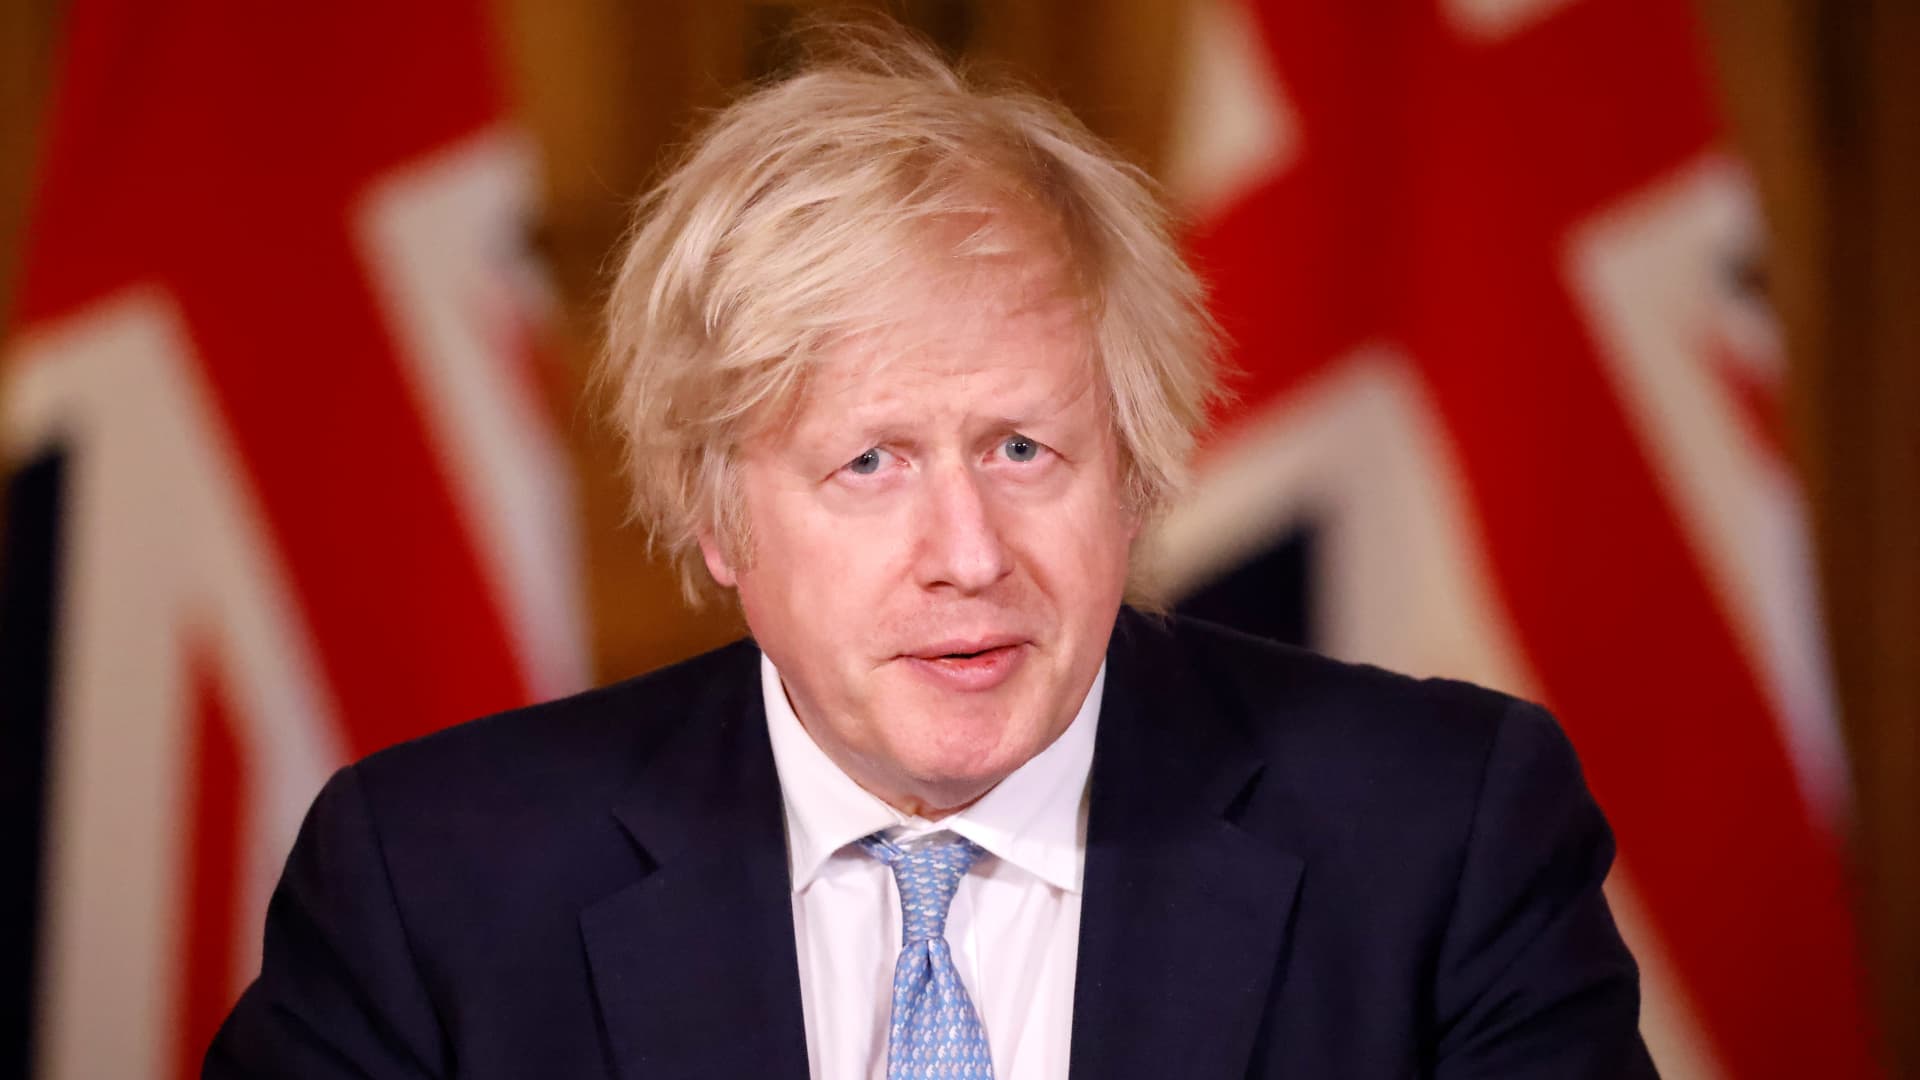 Prime Minister Boris Johnson gives an update on the coronavirus Covid-19 pandemic during a virtual press conference inside 10 Downing Street on March 18, 2021 in London, England.